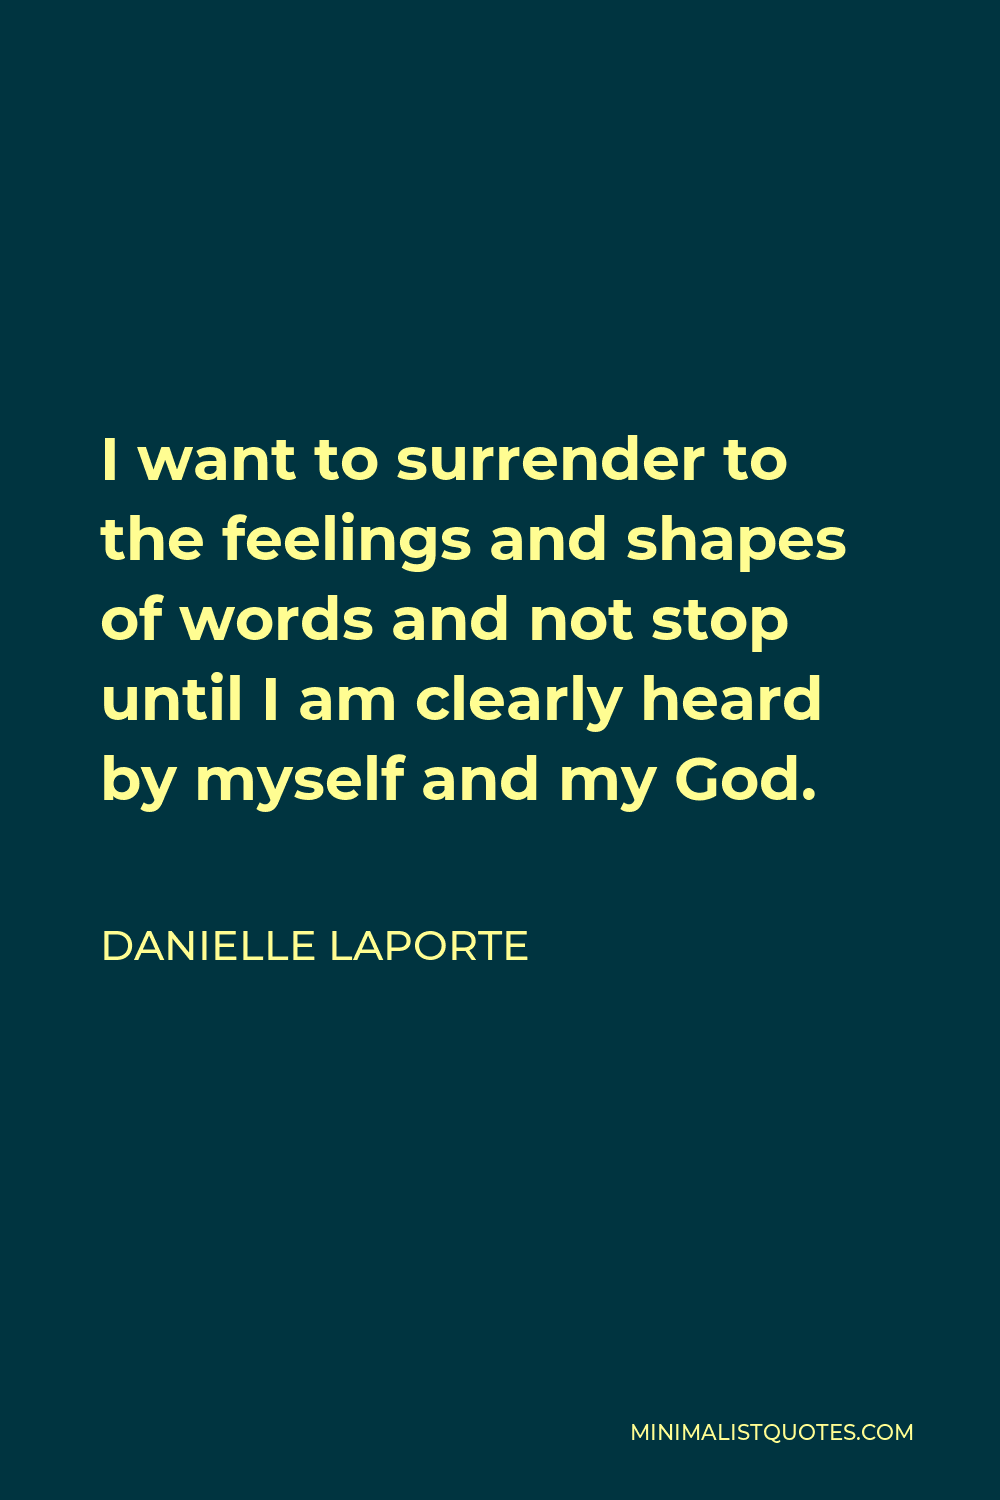 Danielle LaPorte Quote - I want to surrender to the feelings and shapes of words and not stop until I am clearly heard by myself and my God.